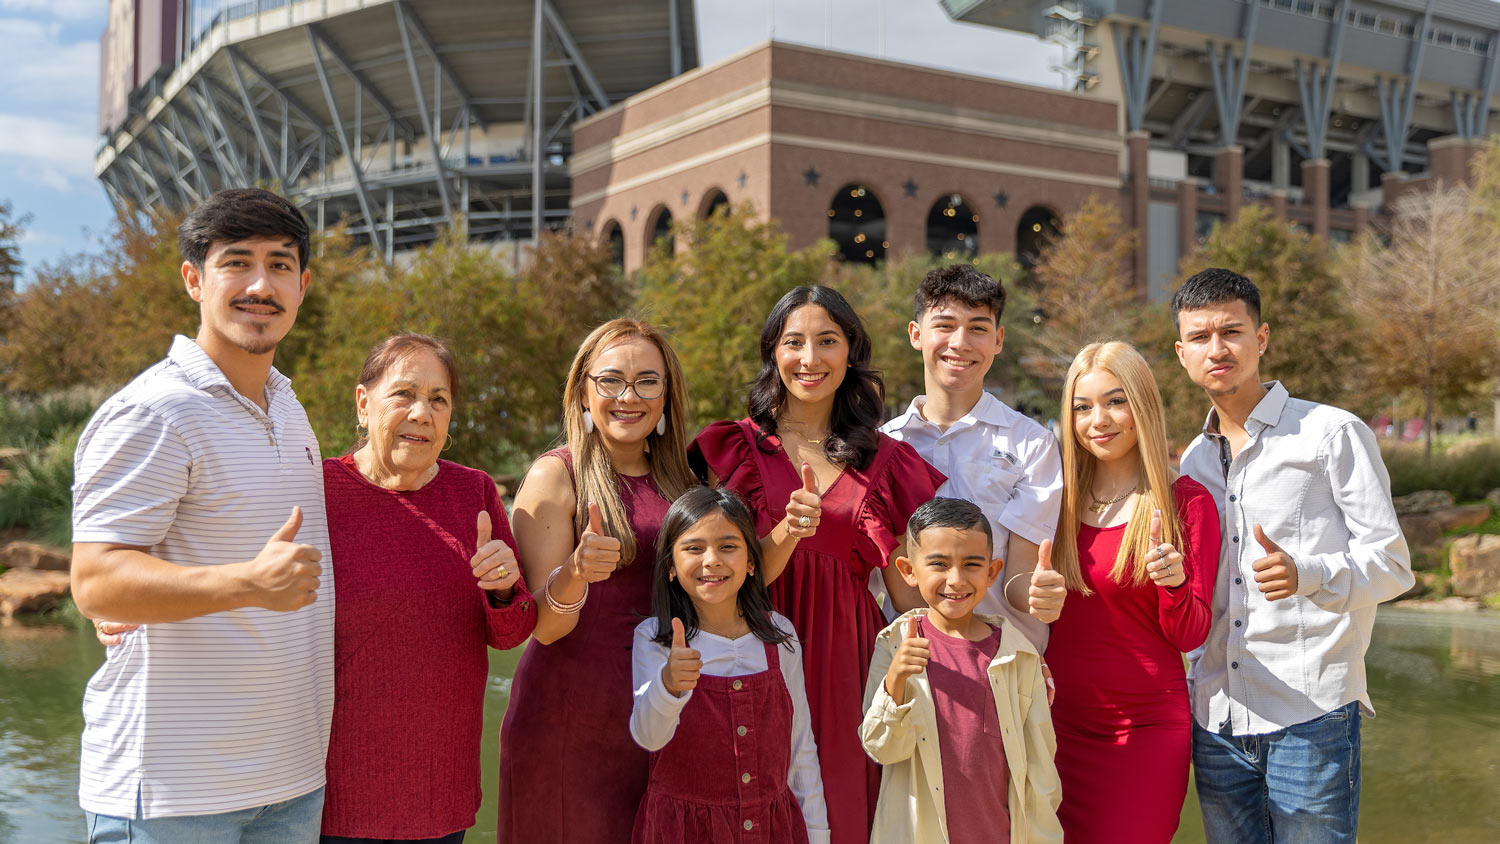 An 91短视频 on their Ring Day poses with their family in front of Kyle Field